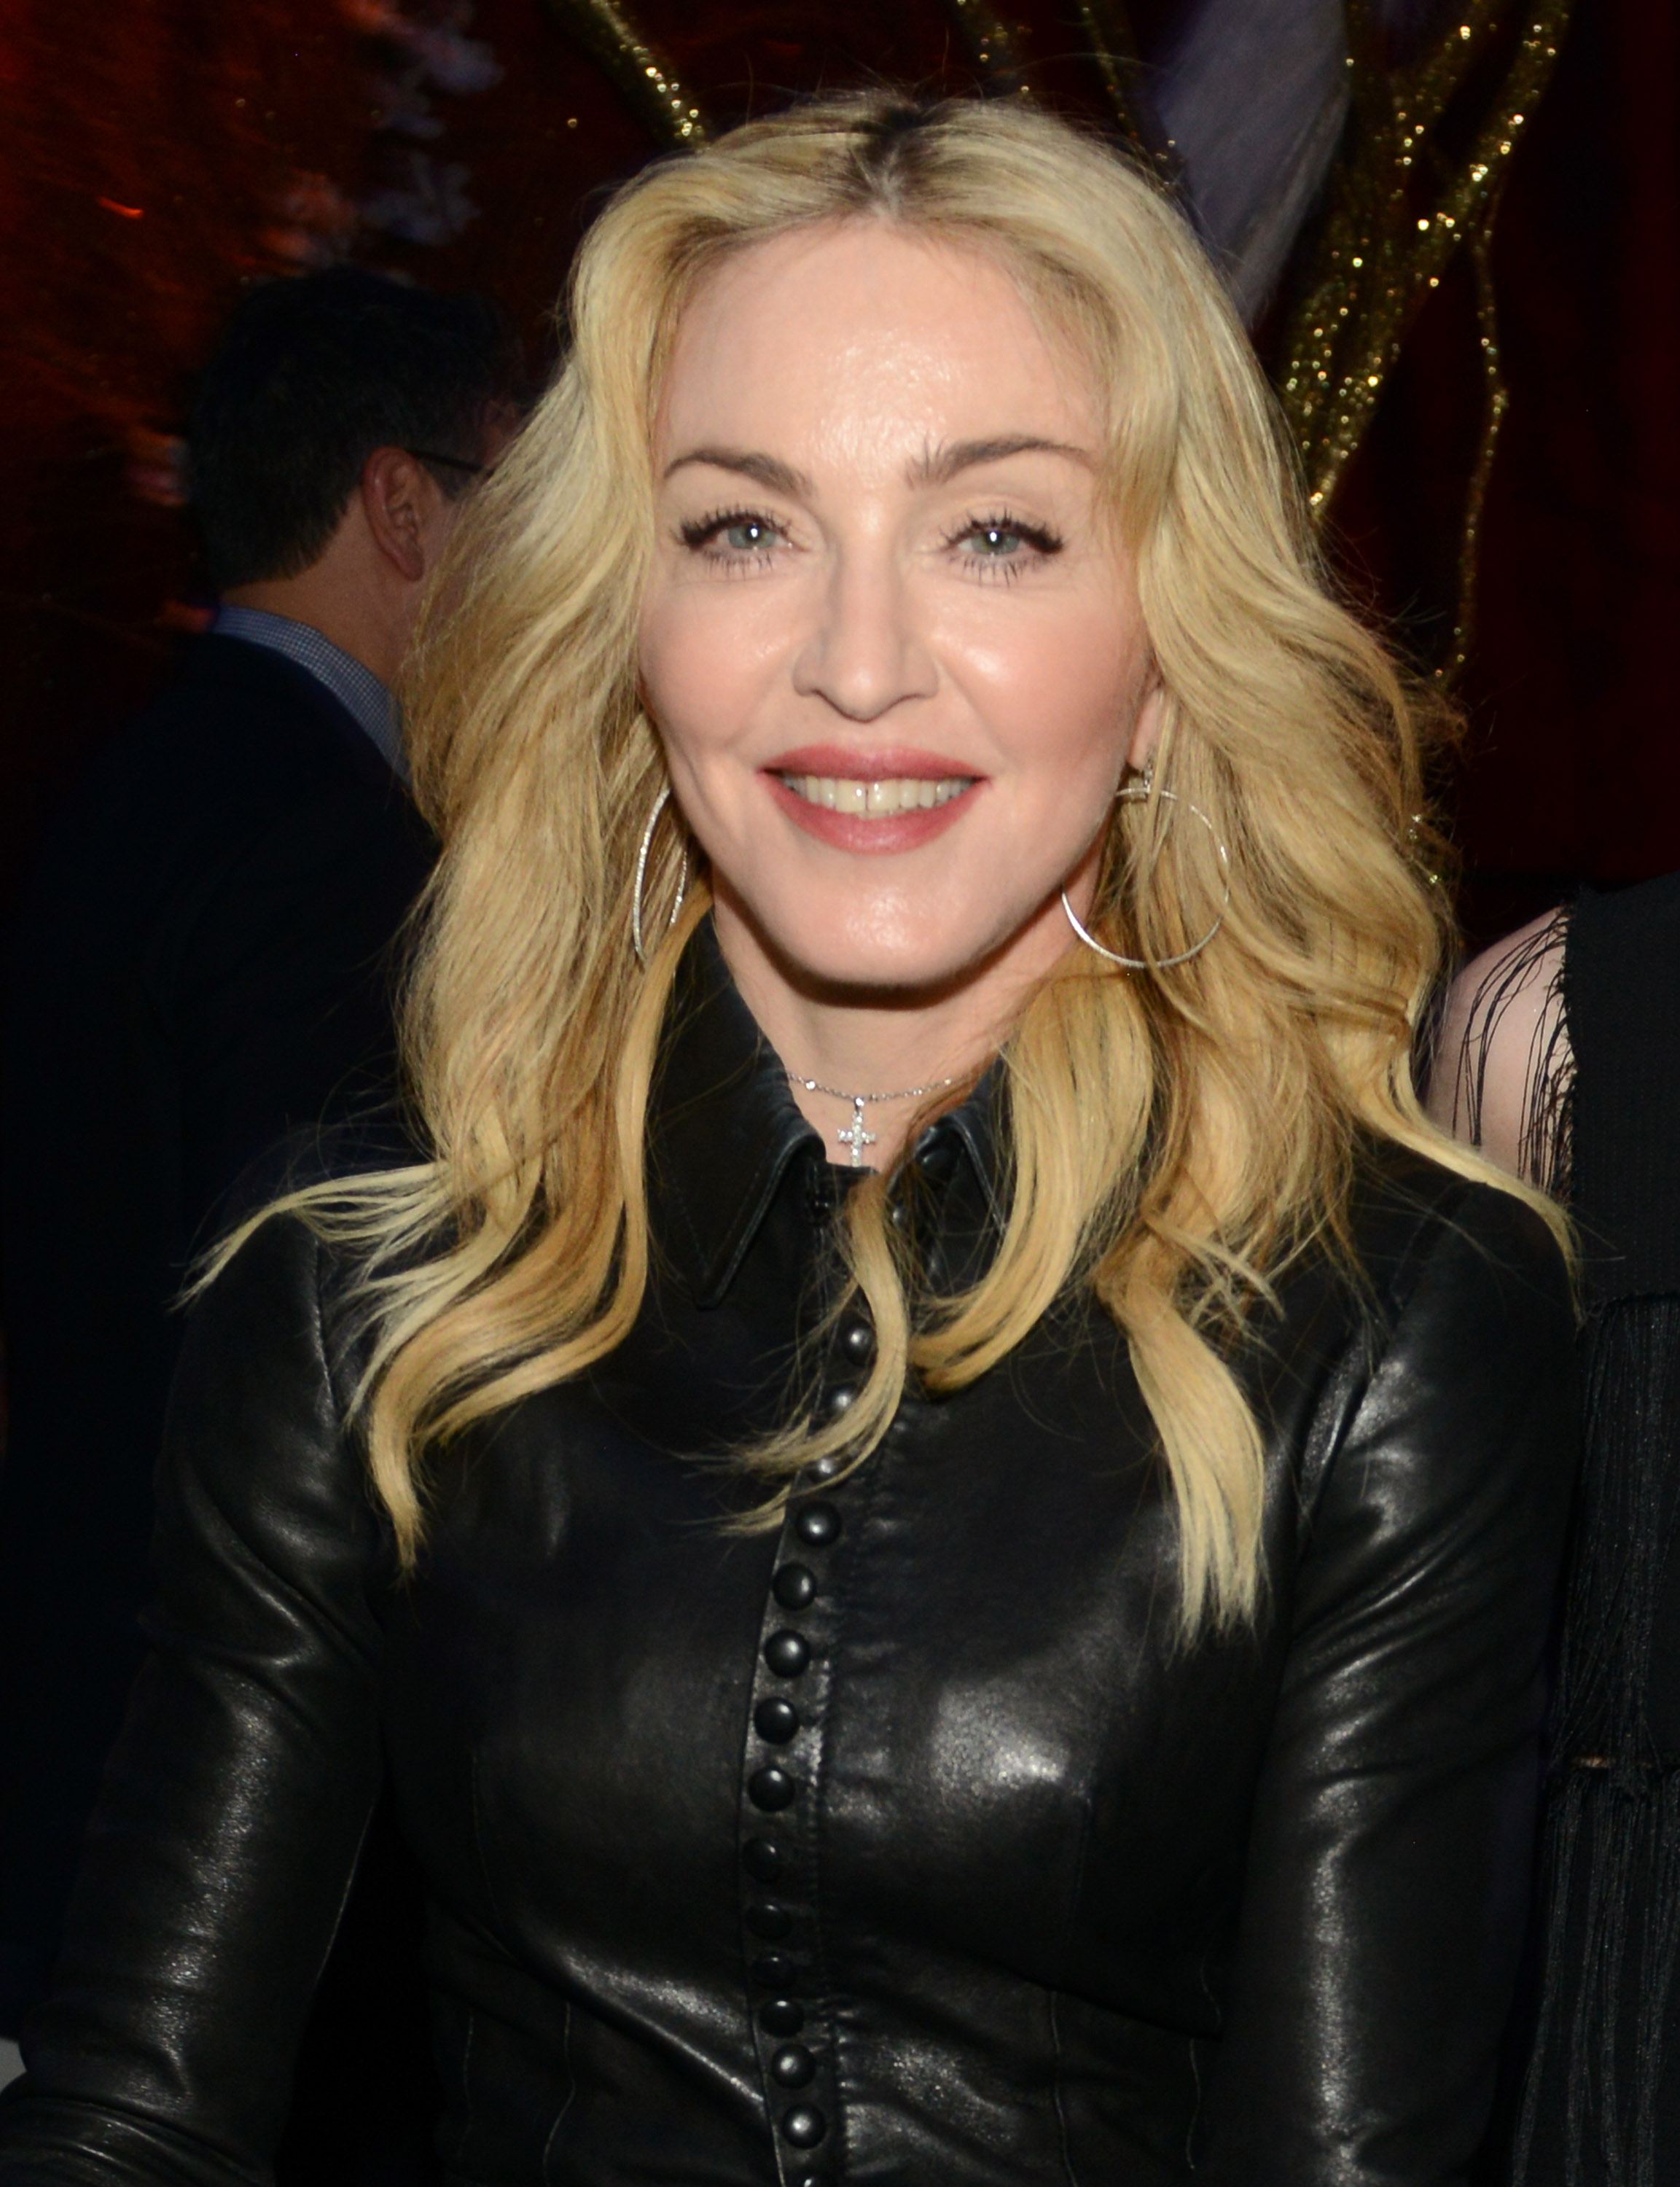 Madonna attends The Great American Songbook event honoring Bryan Lourd at Alice Tully Hall on Feb. 10, 2014 in New York. (Kevin Mazur—Getty Images)